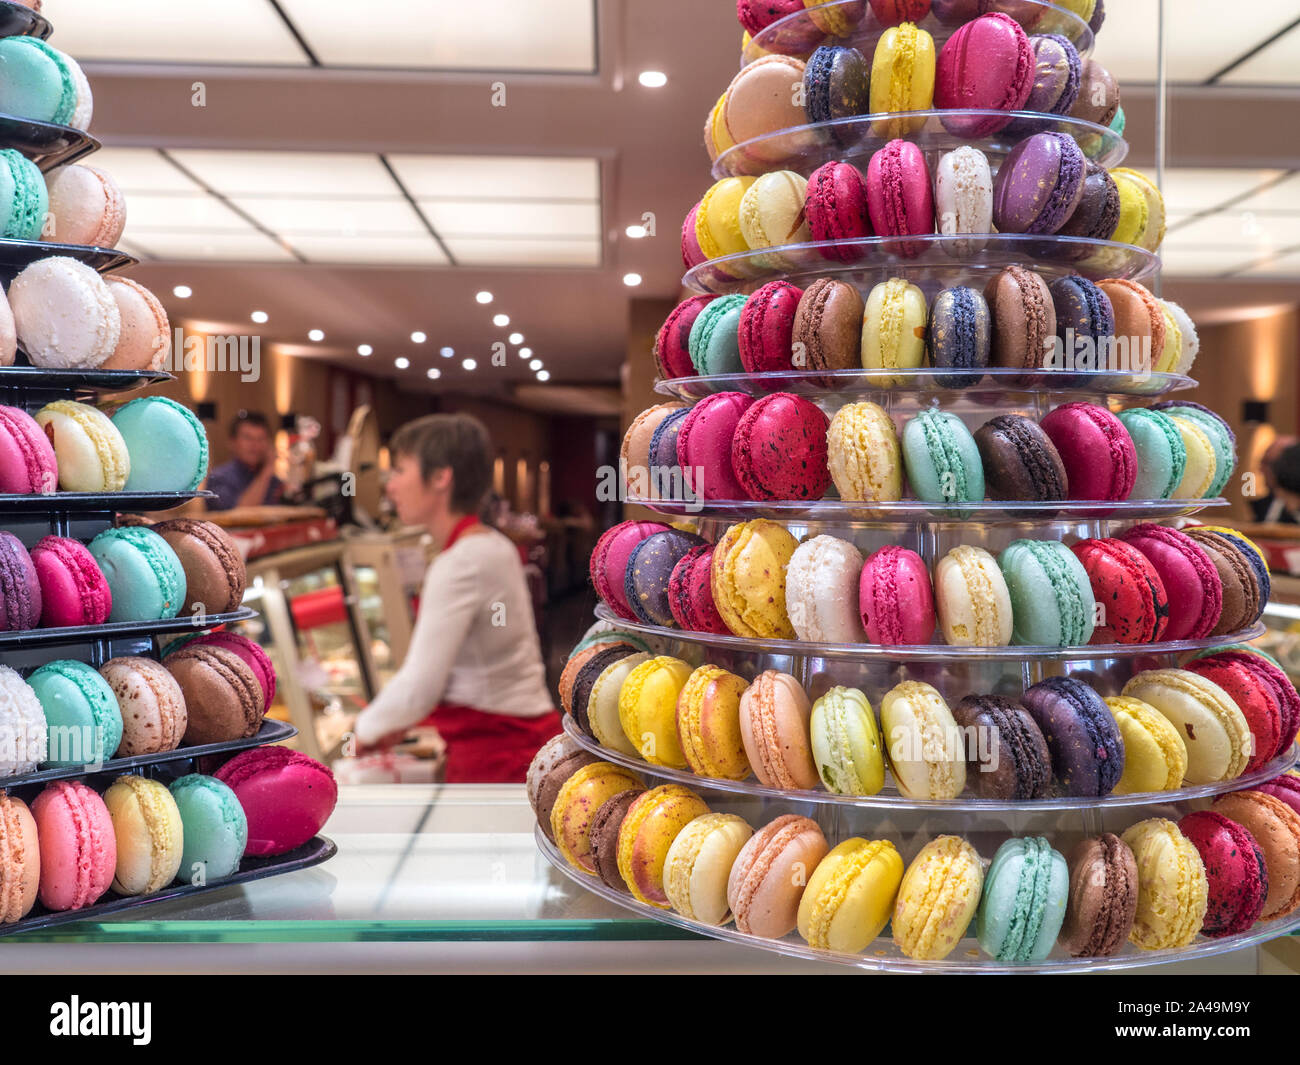 MACAROONS PATISSERIE Philomene Macaronerie cake shop with colourful display of macarons (macaroons) Quimper Old Quarter Rue Kereon Brittany France Stock Photo